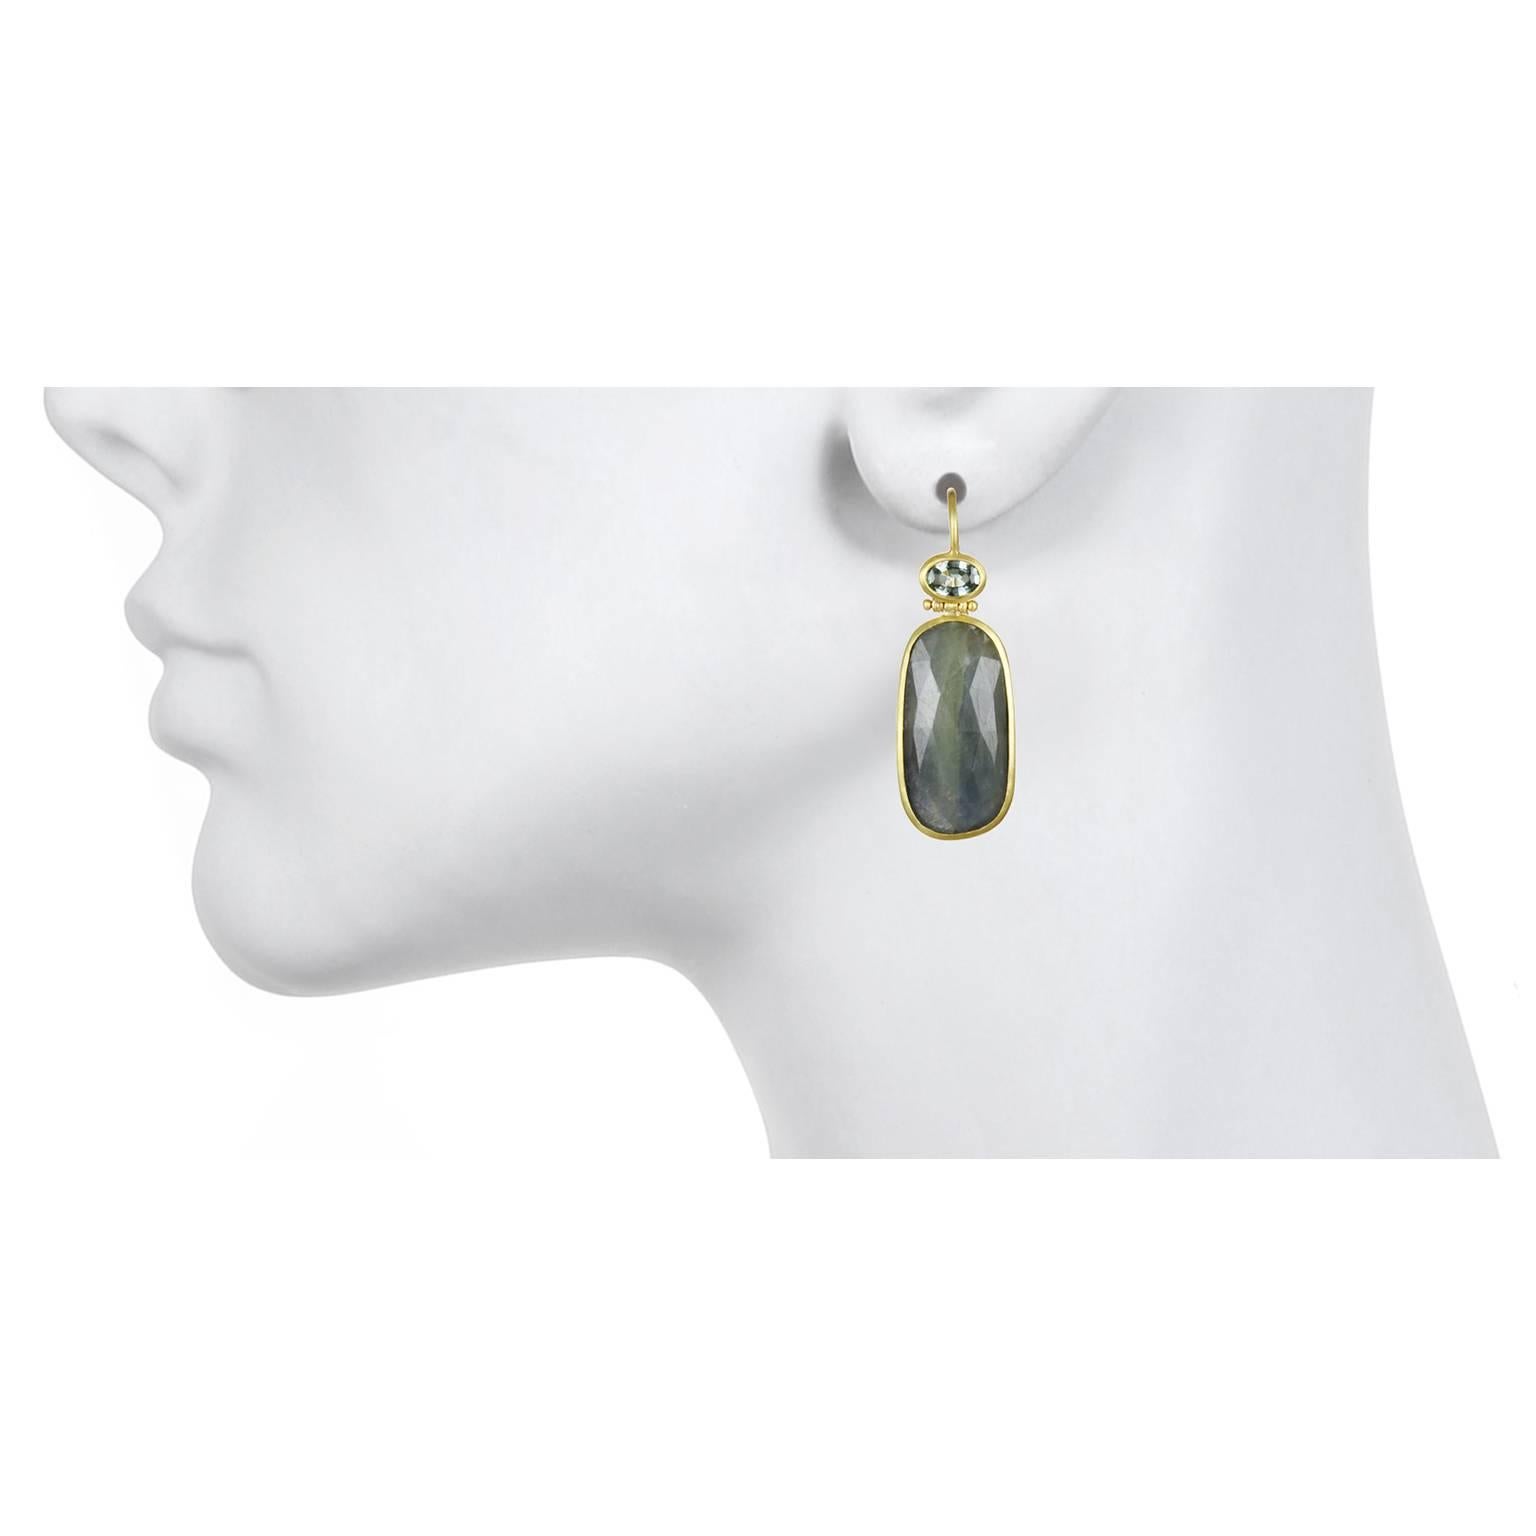 Handcrafted in 18k gold, rose cut blue-green sapphire slices are bezel set and are accented with blue-green faceted sapphires. A great addition to any jewelry wardrobe to create your own unique style! French Ear Wires 

Metal: 18K Green Gold, Matte